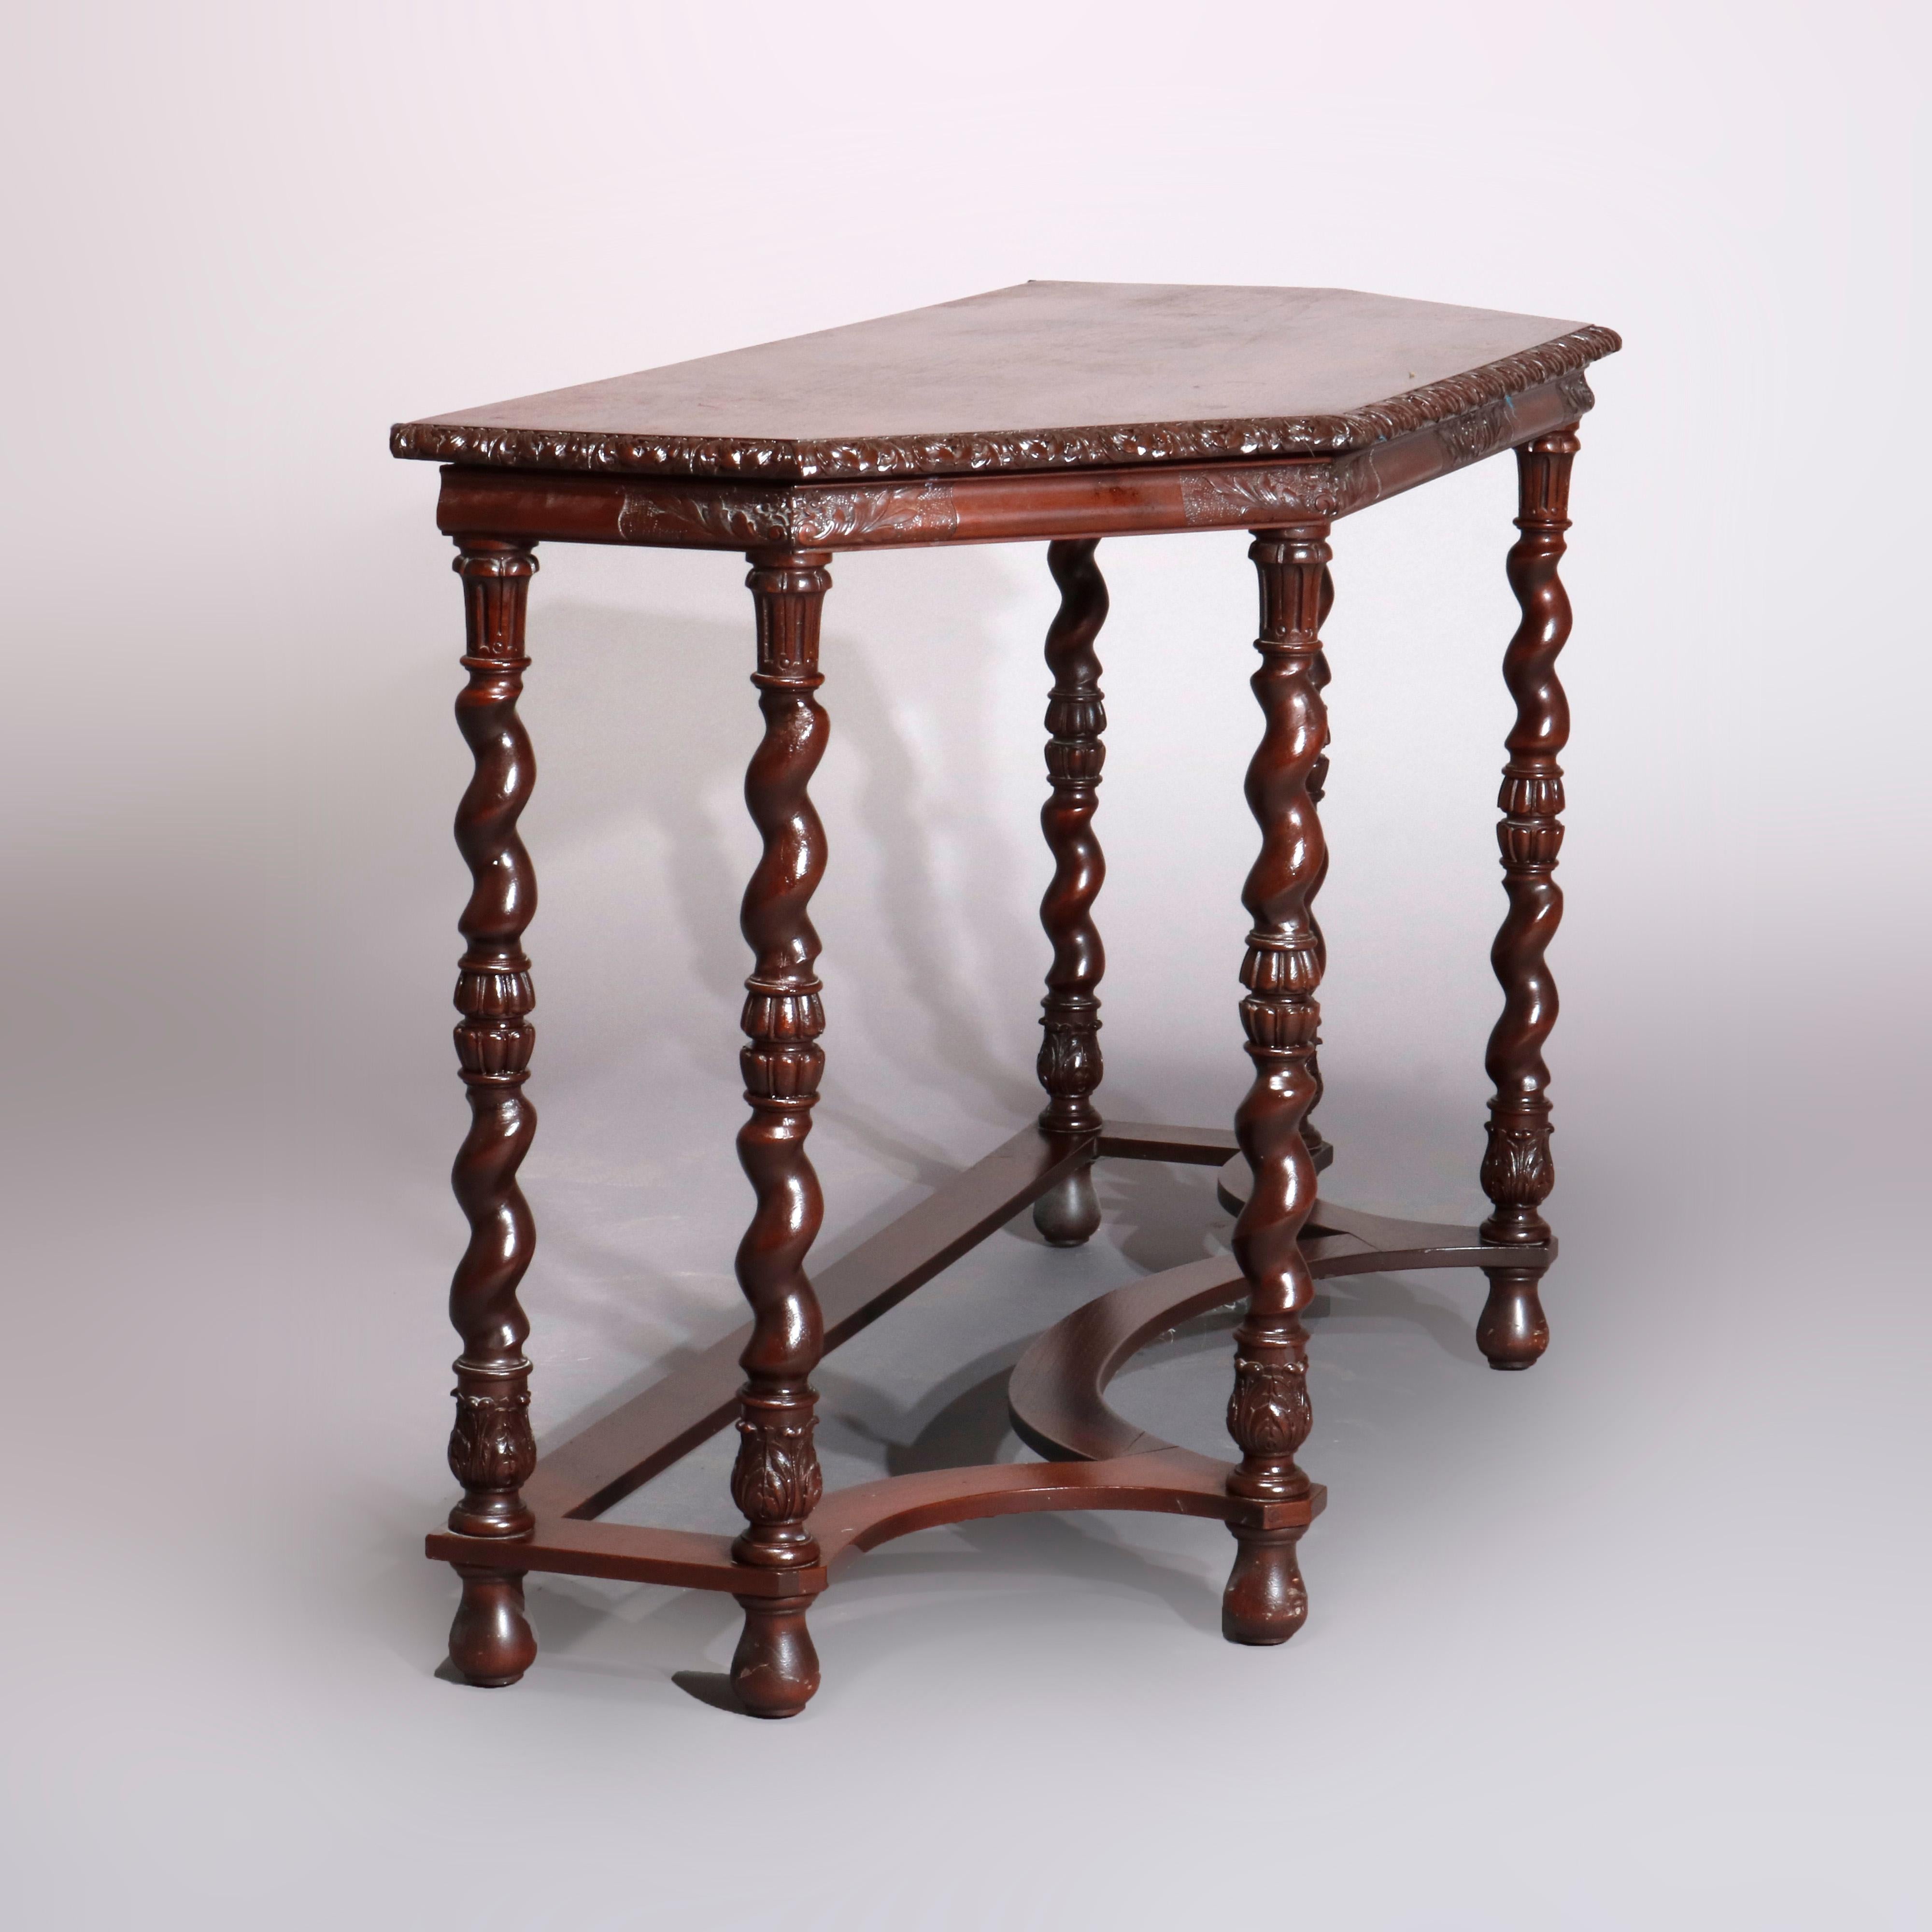 An antique English Elizabethan console table offers clipped corner top with carved foliate bordering raised on barley twist legs having acanthus bases and shaped stretcher base, circa 1930

Measures: 29.5